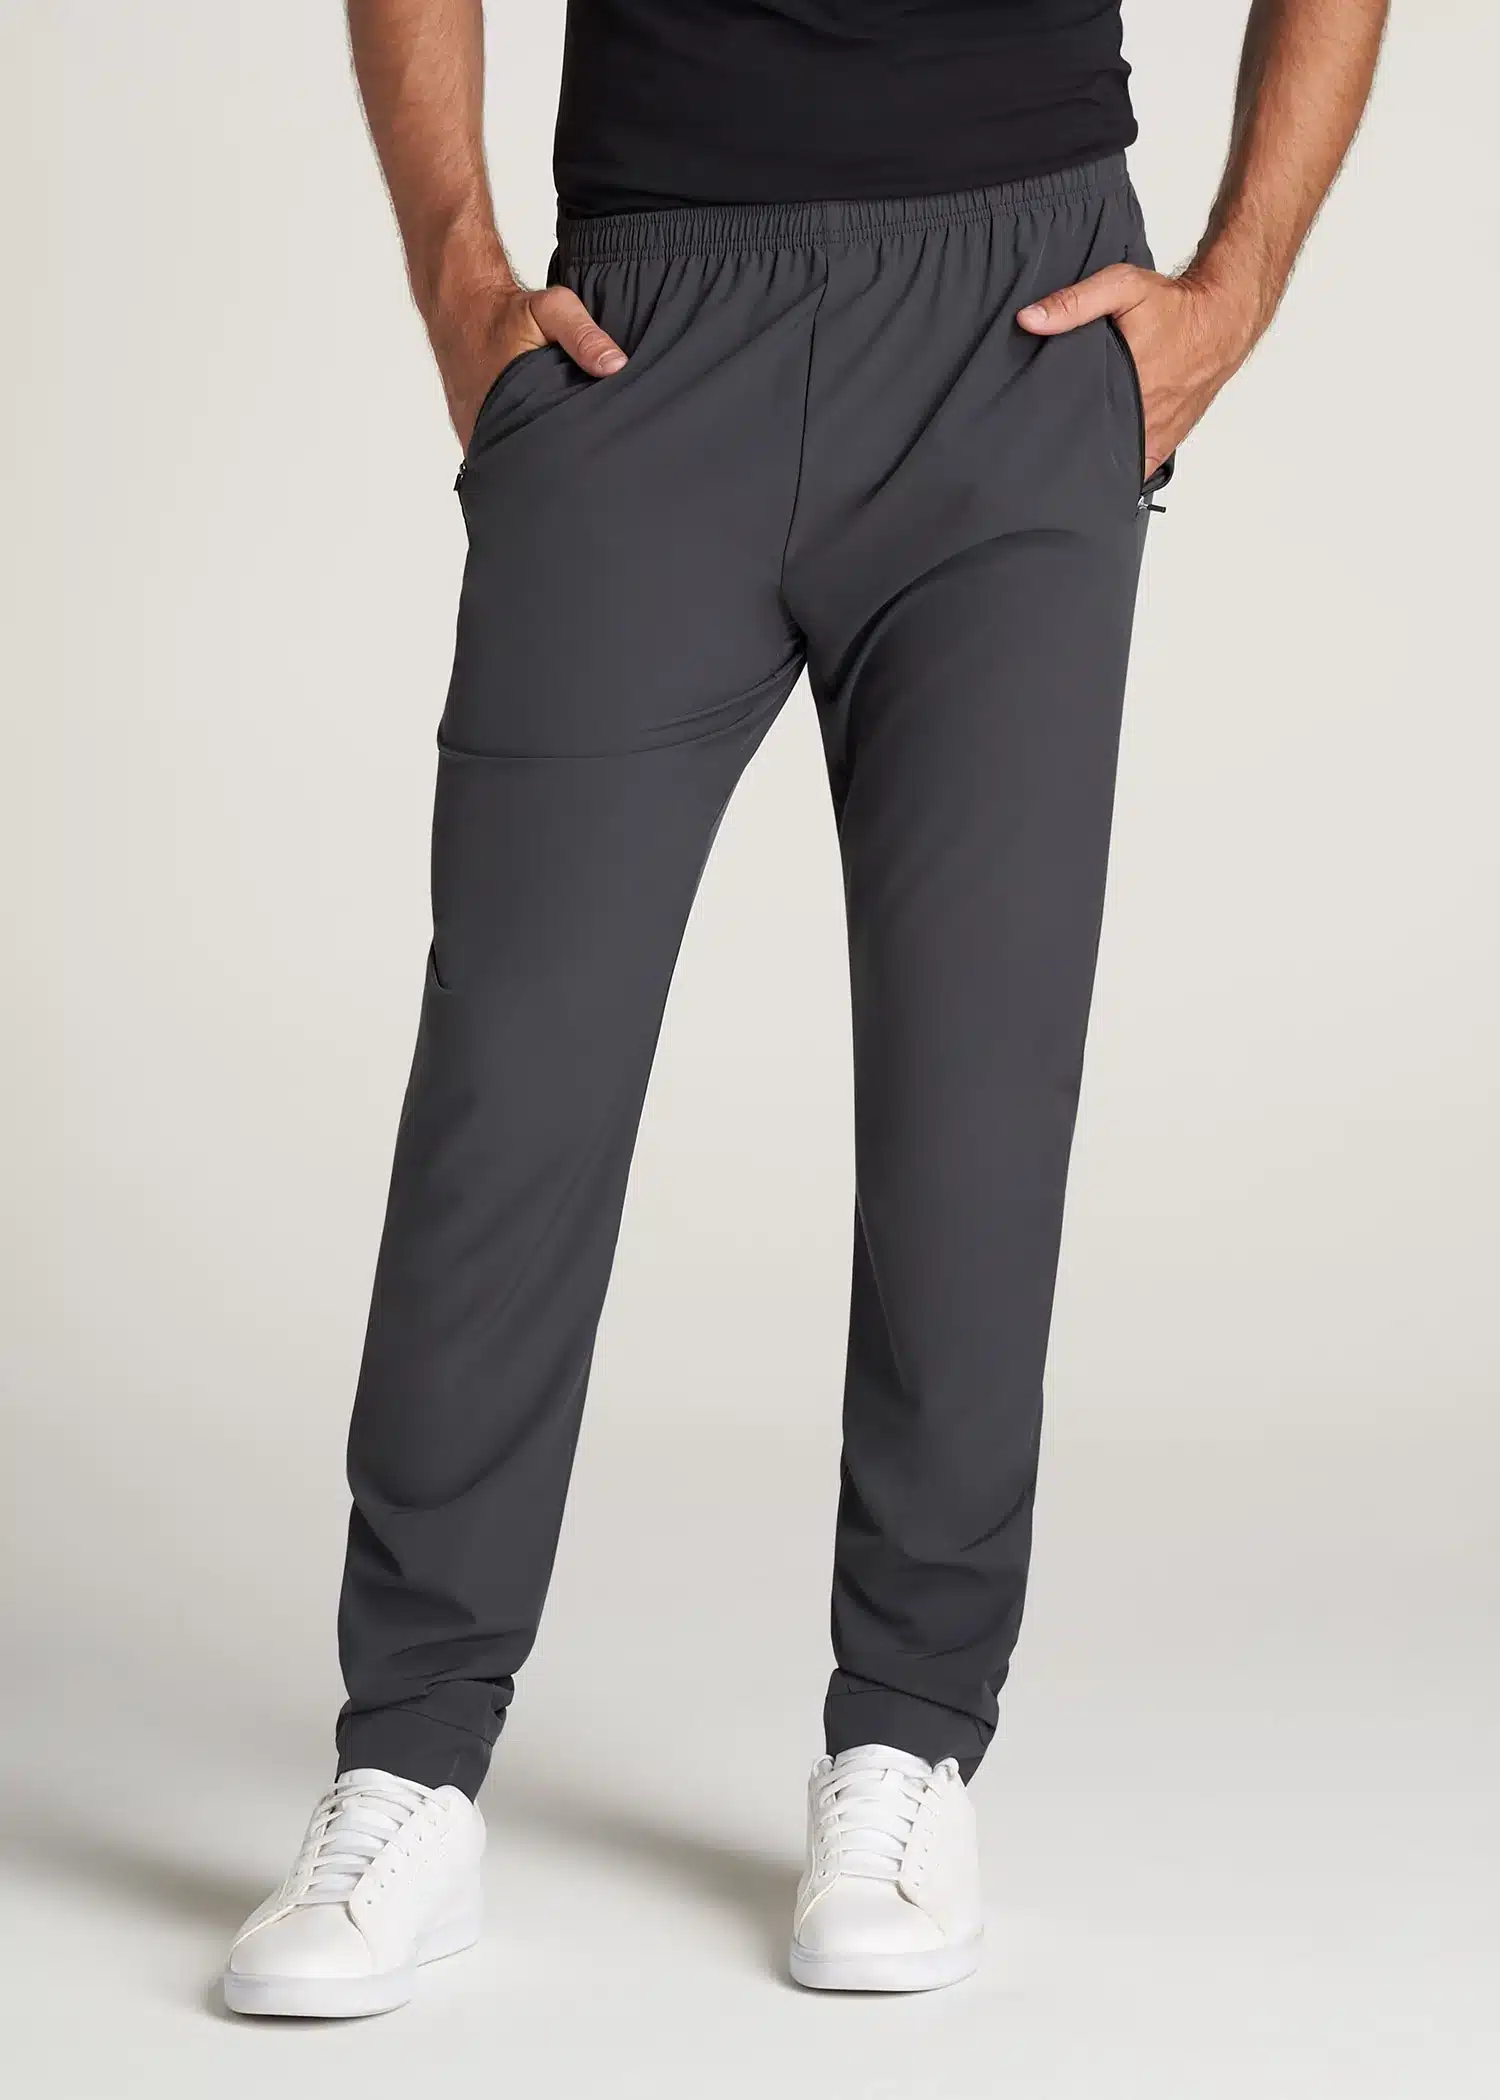 American Tall: MEN'S TALL TAPERED-FIT LIGHT-WEIGHT ATHLETIC PANTS |  CHARCOAL *Model measures: 6'7, 220 lbs*